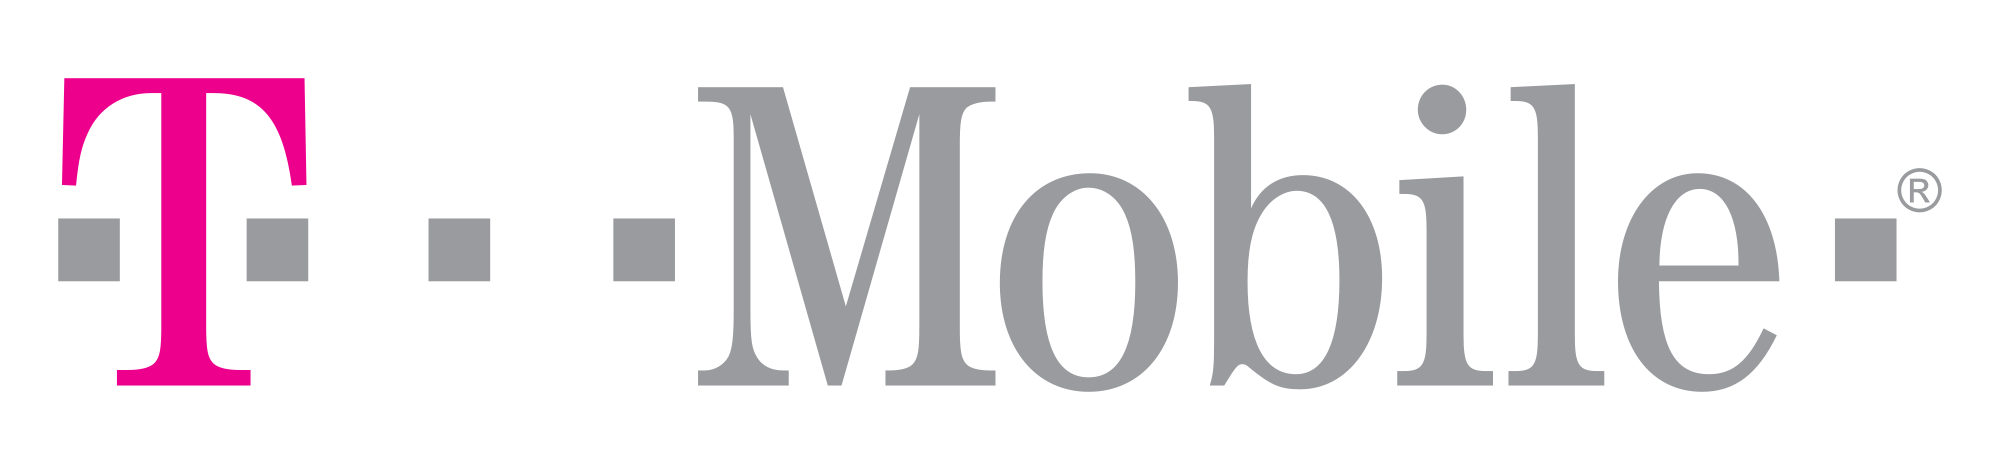 T-Mobile_logo.png